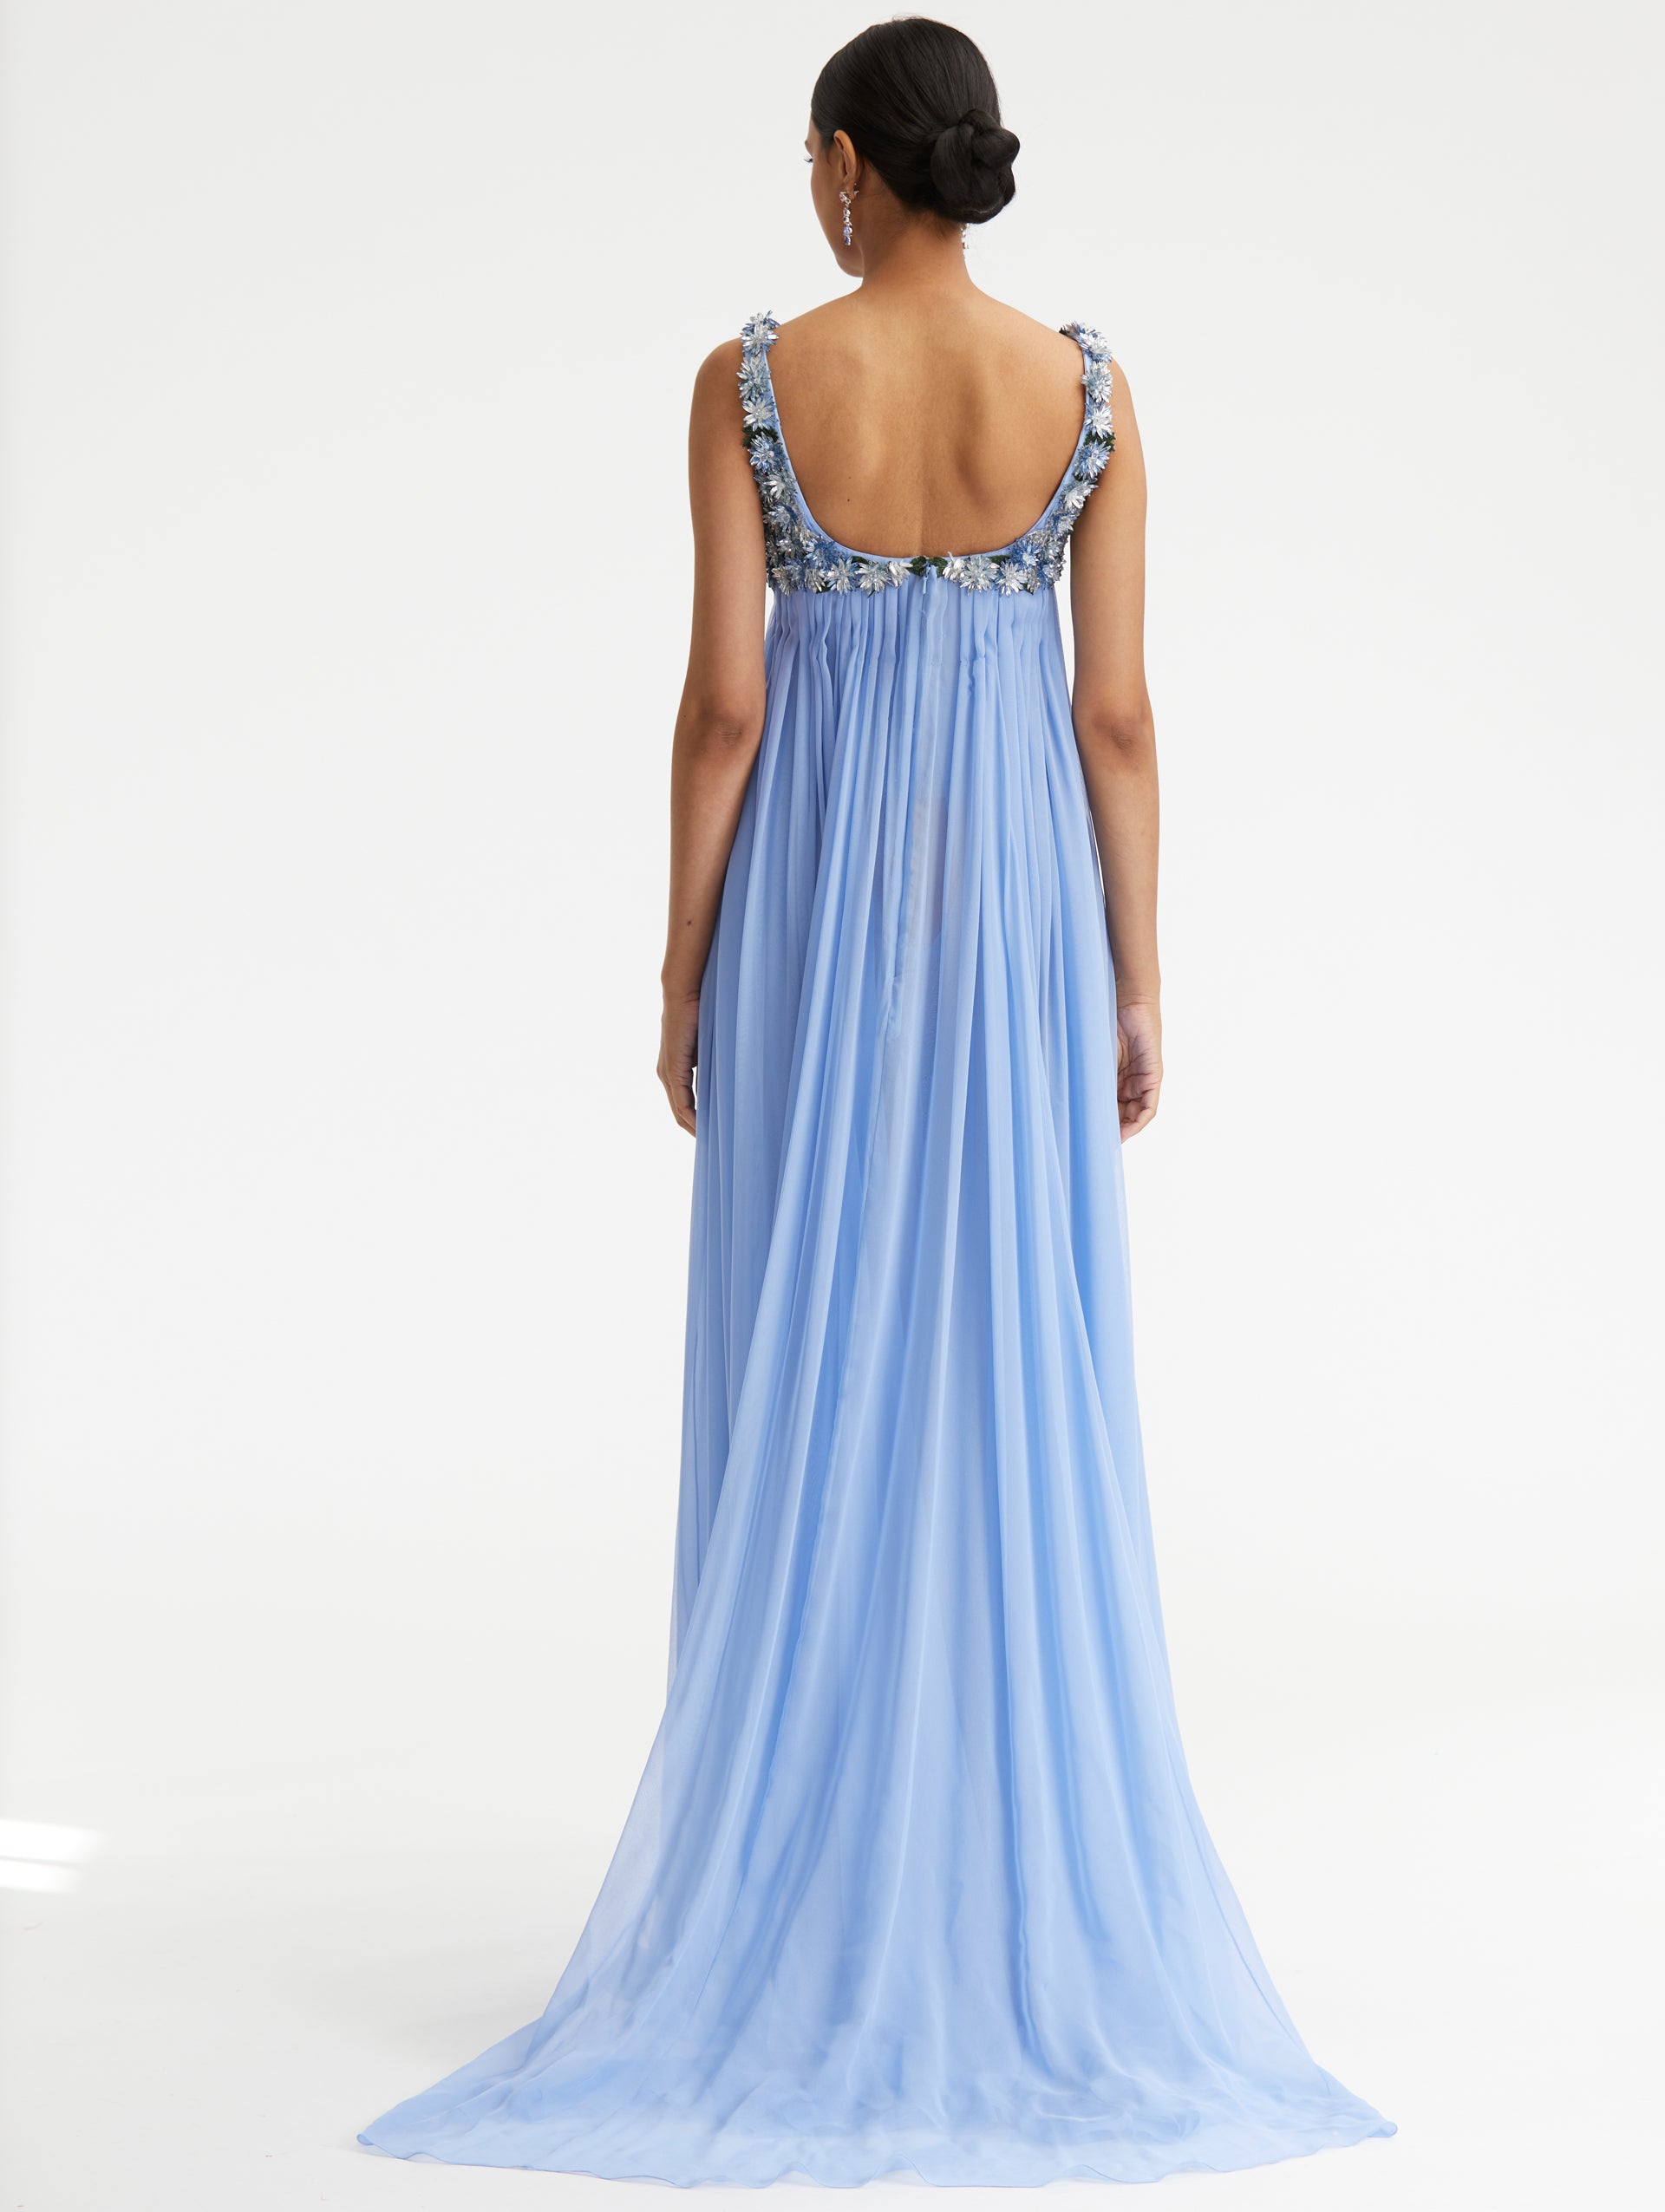 Crystal Hydrangea Embroidered Chiffon Gown